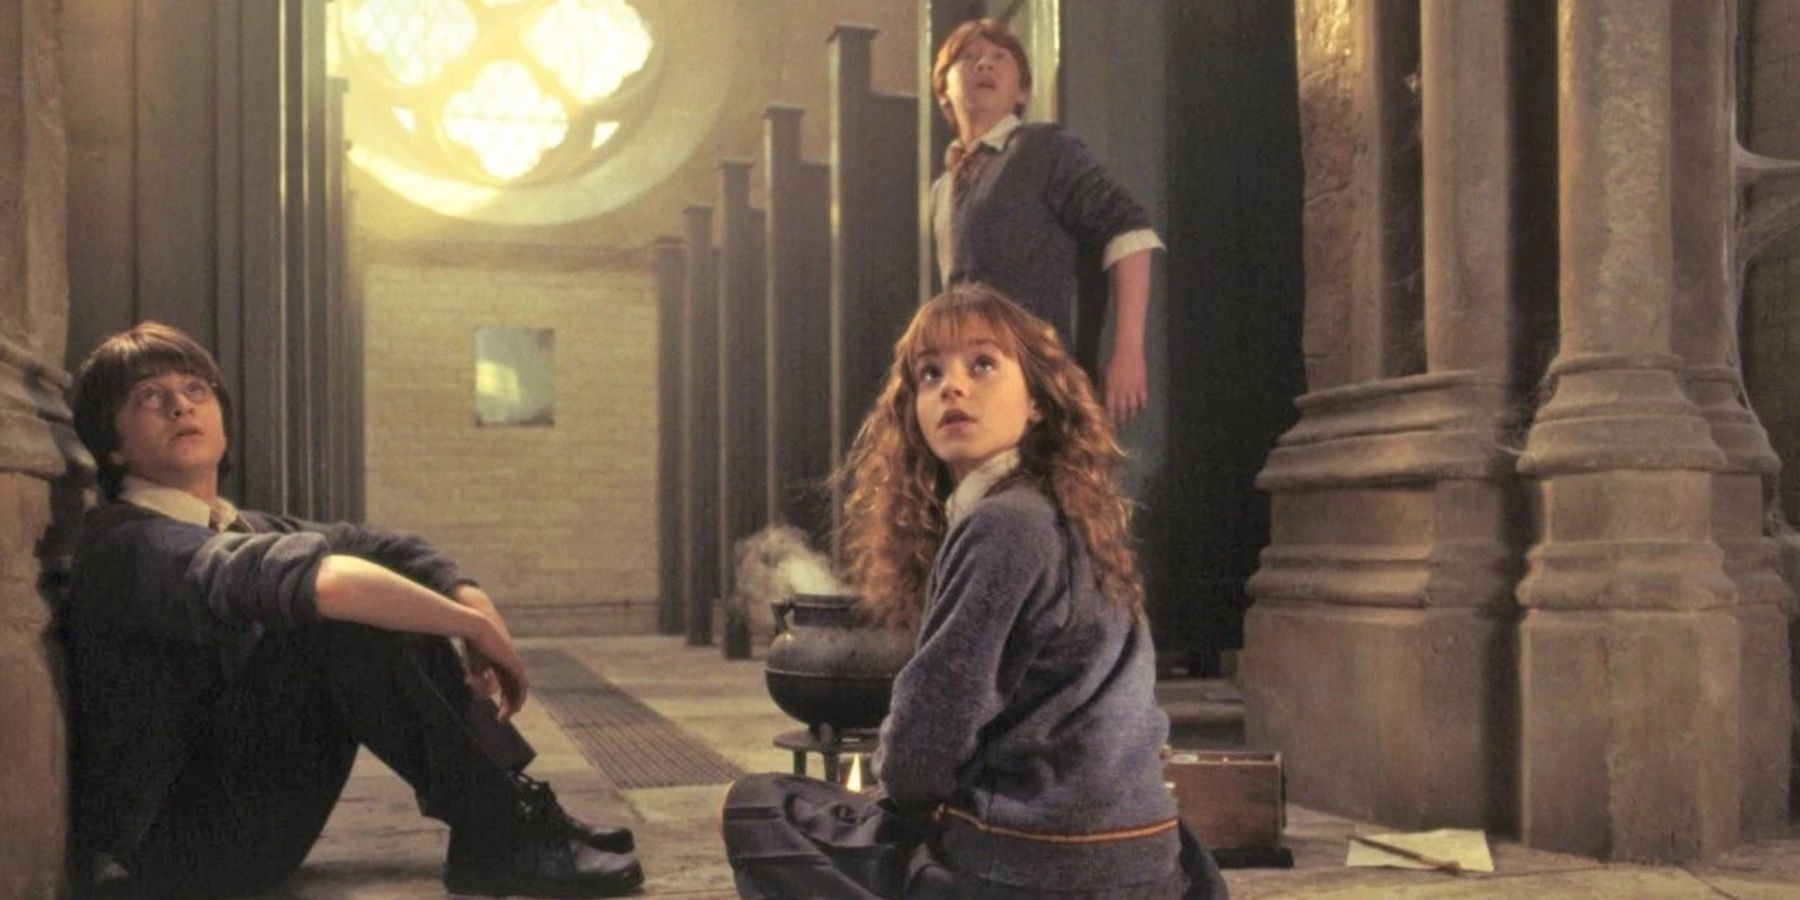 Hermione brews the Polyjuice Potion in Harry and Ron's presence in Moaning Myrtle's Bathroom in Harry Potter and the Chamber of Secrets.